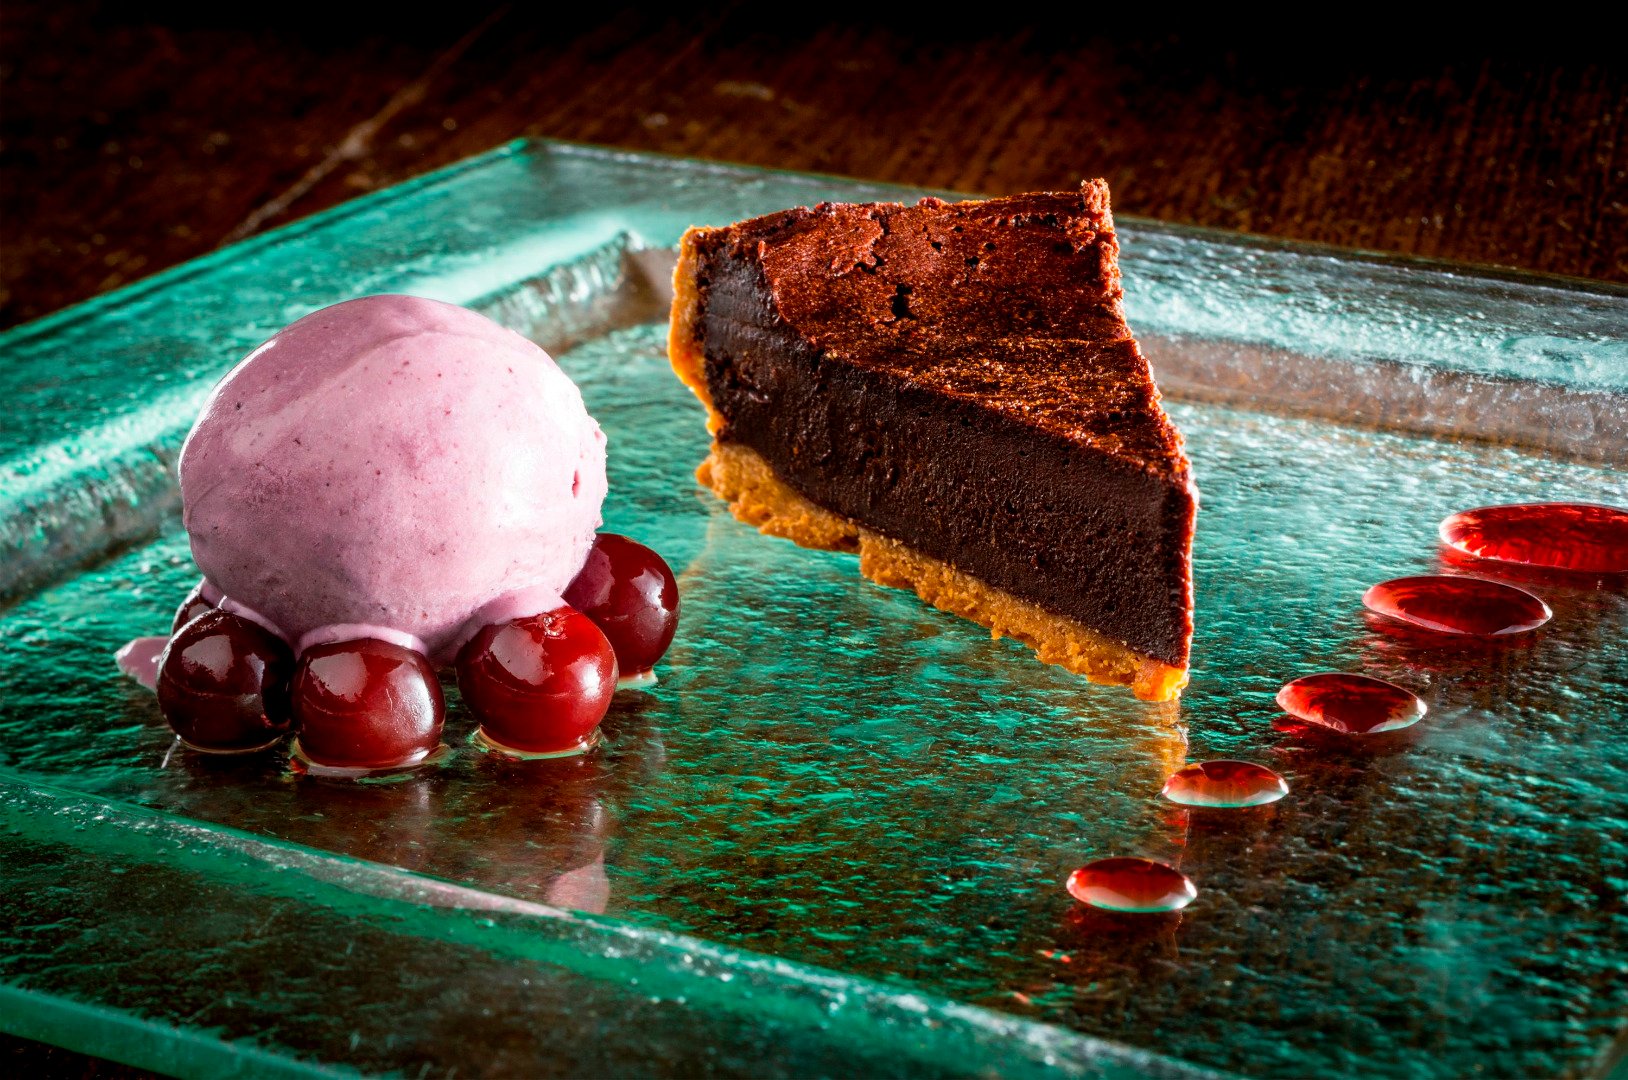 Image name homemade chocolate tart with cherry ice cream cherries the blue lion inn east witton the good pub guide inn of the year 20141 the 23 image from the post Eating out in the Yorkshire Dales in Yorkshire.com.